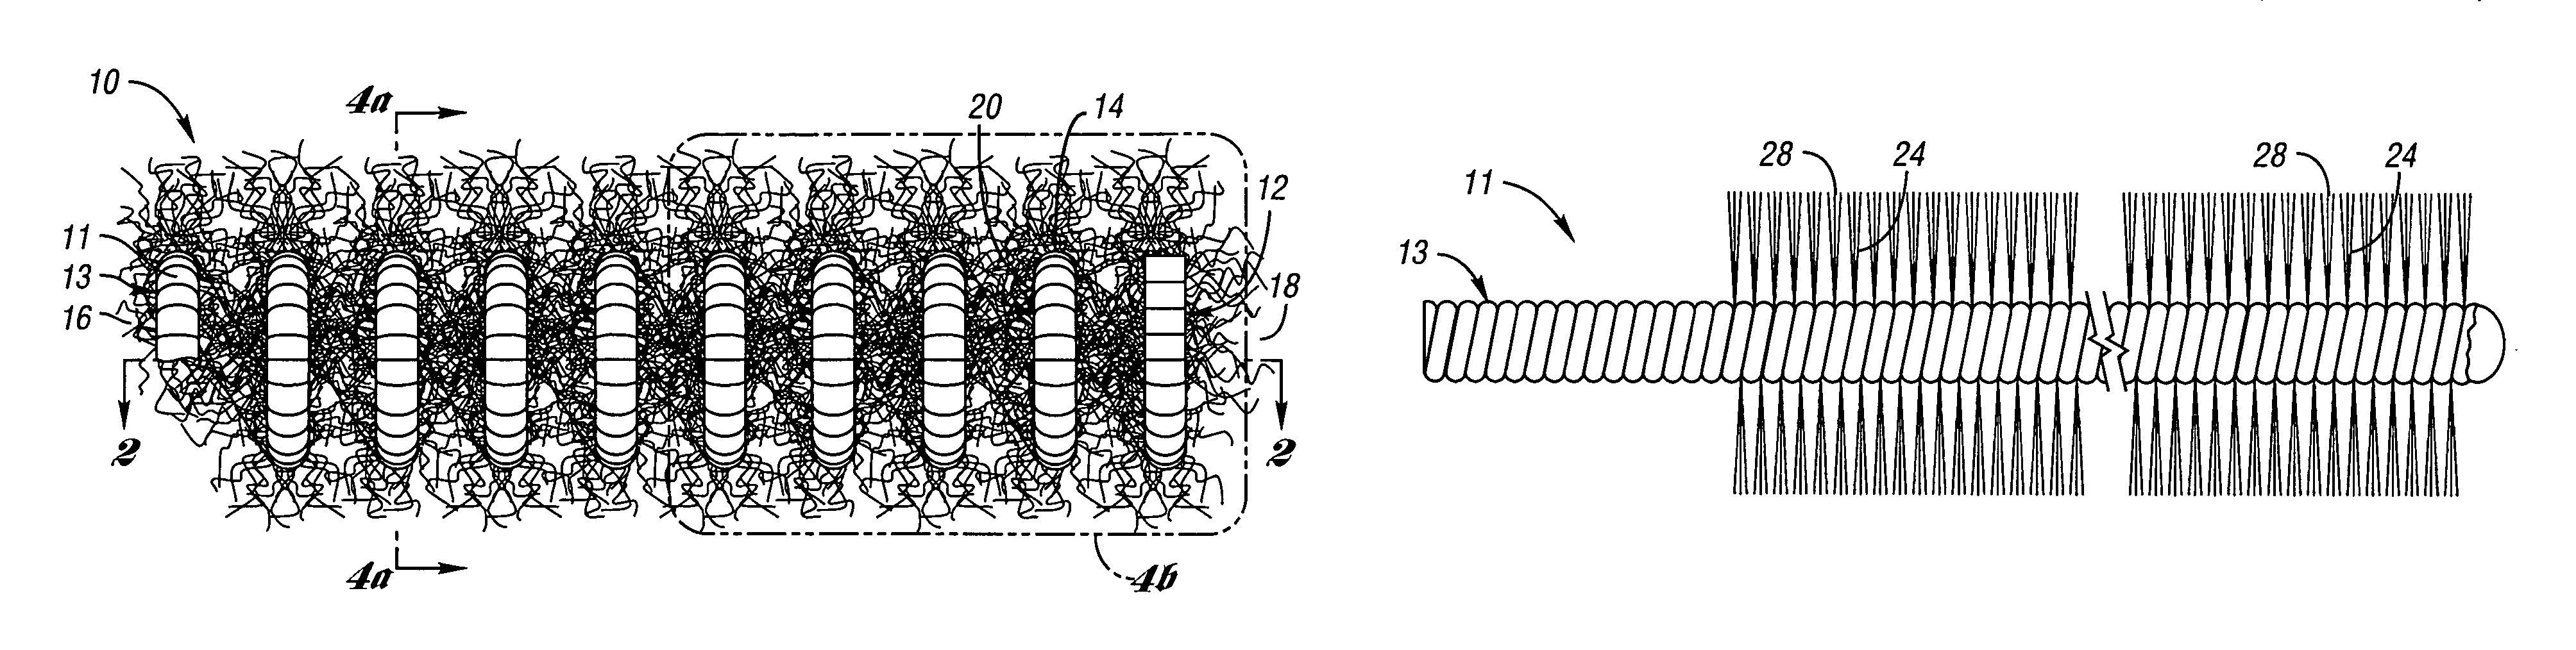 Occluding device and method of occluding fluid flow through a body vessel